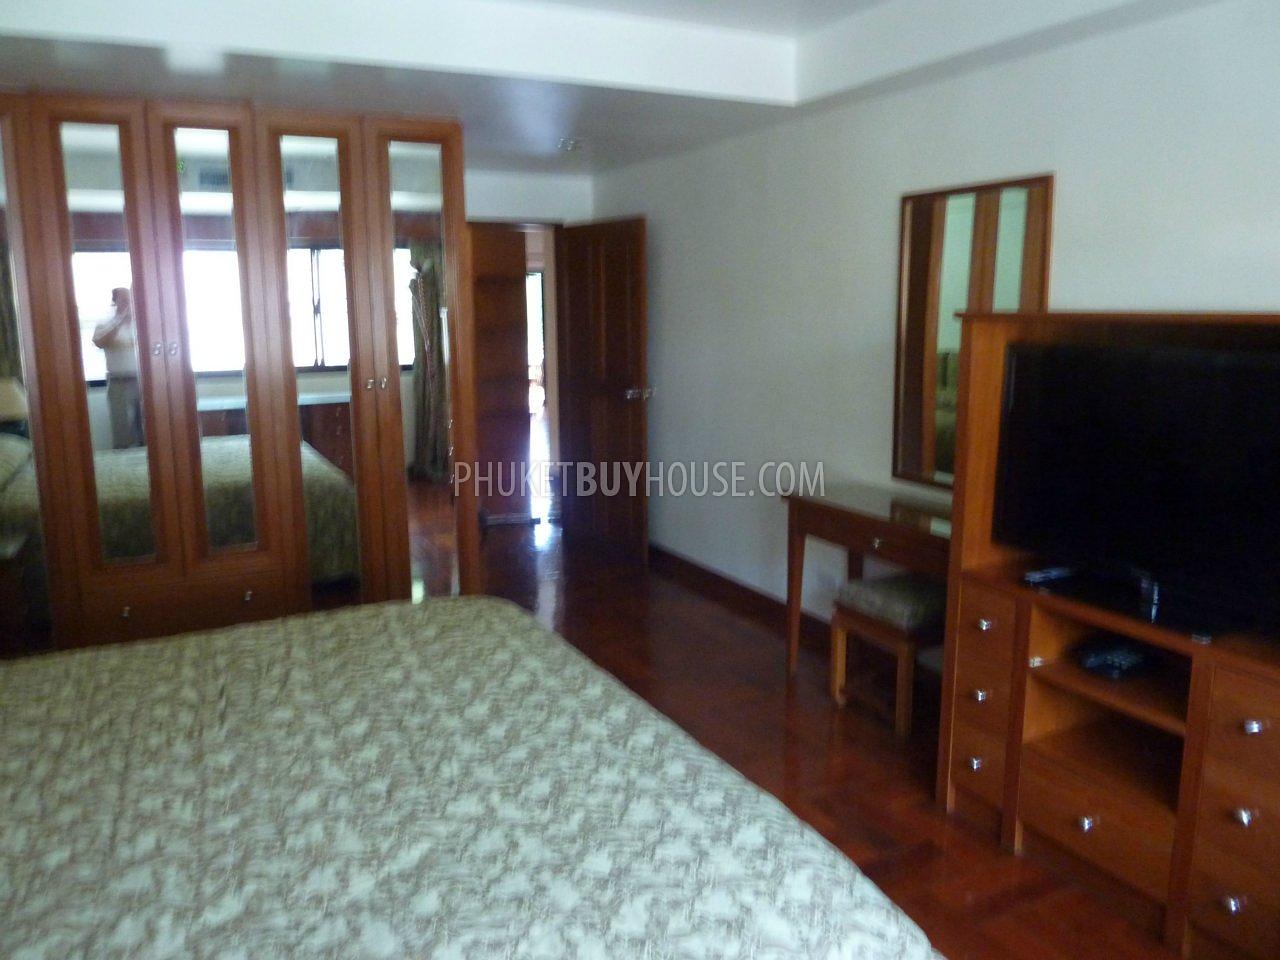 NAI2456: Freehold: Very nice 2 bedr. apartment (top floor), fully furnished, near beautiful Nai Harn Beach. Фото #27